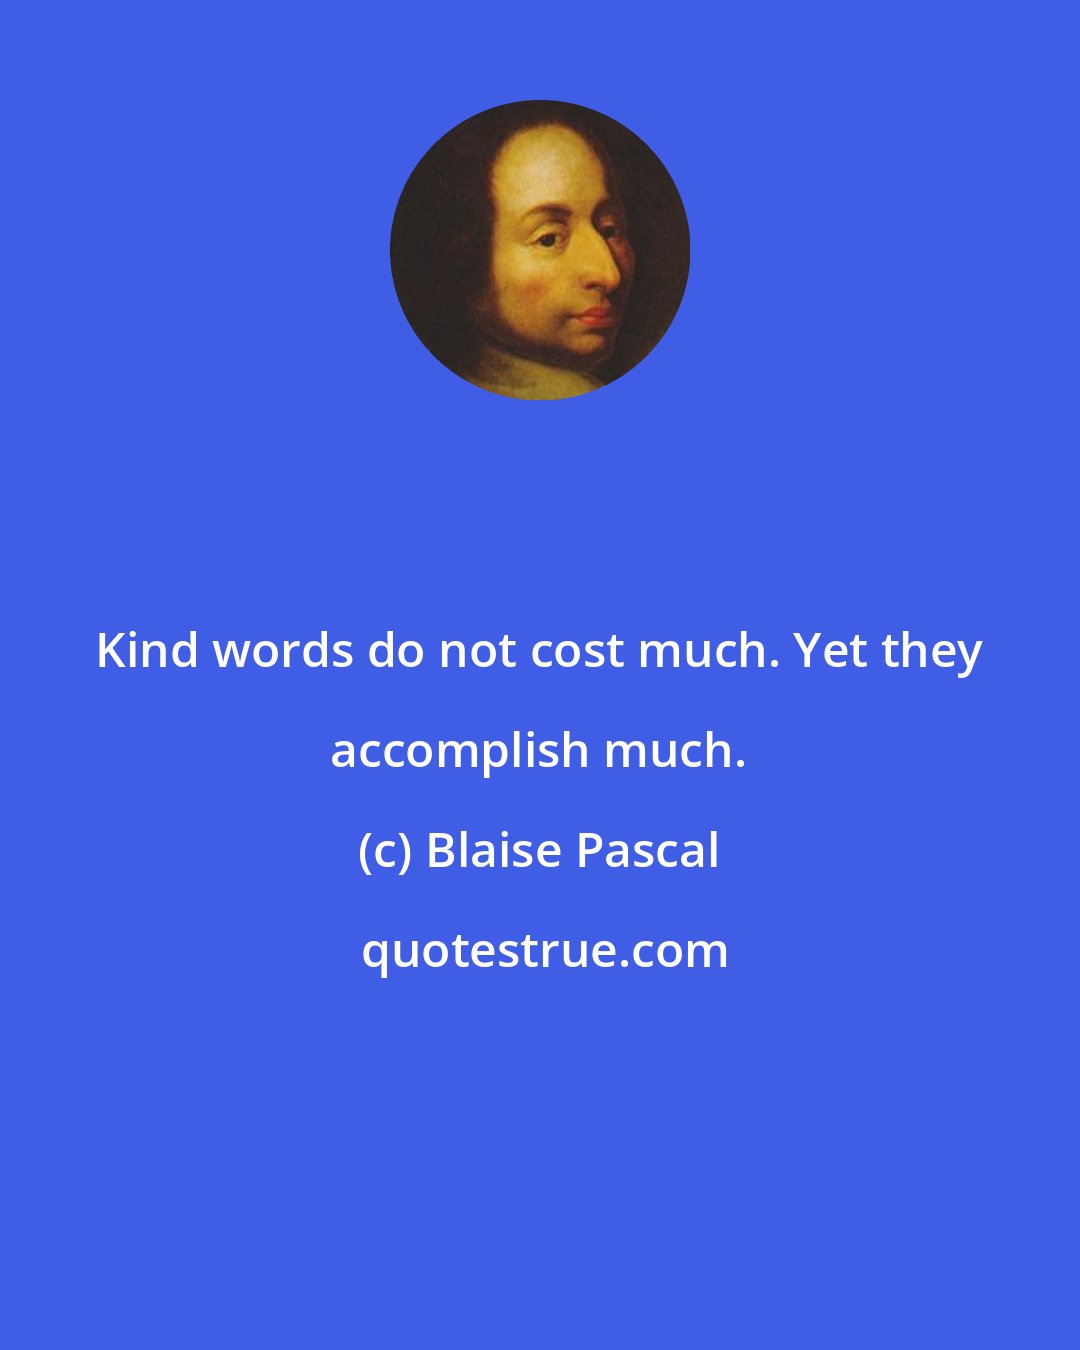 Blaise Pascal: Kind words do not cost much. Yet they accomplish much.